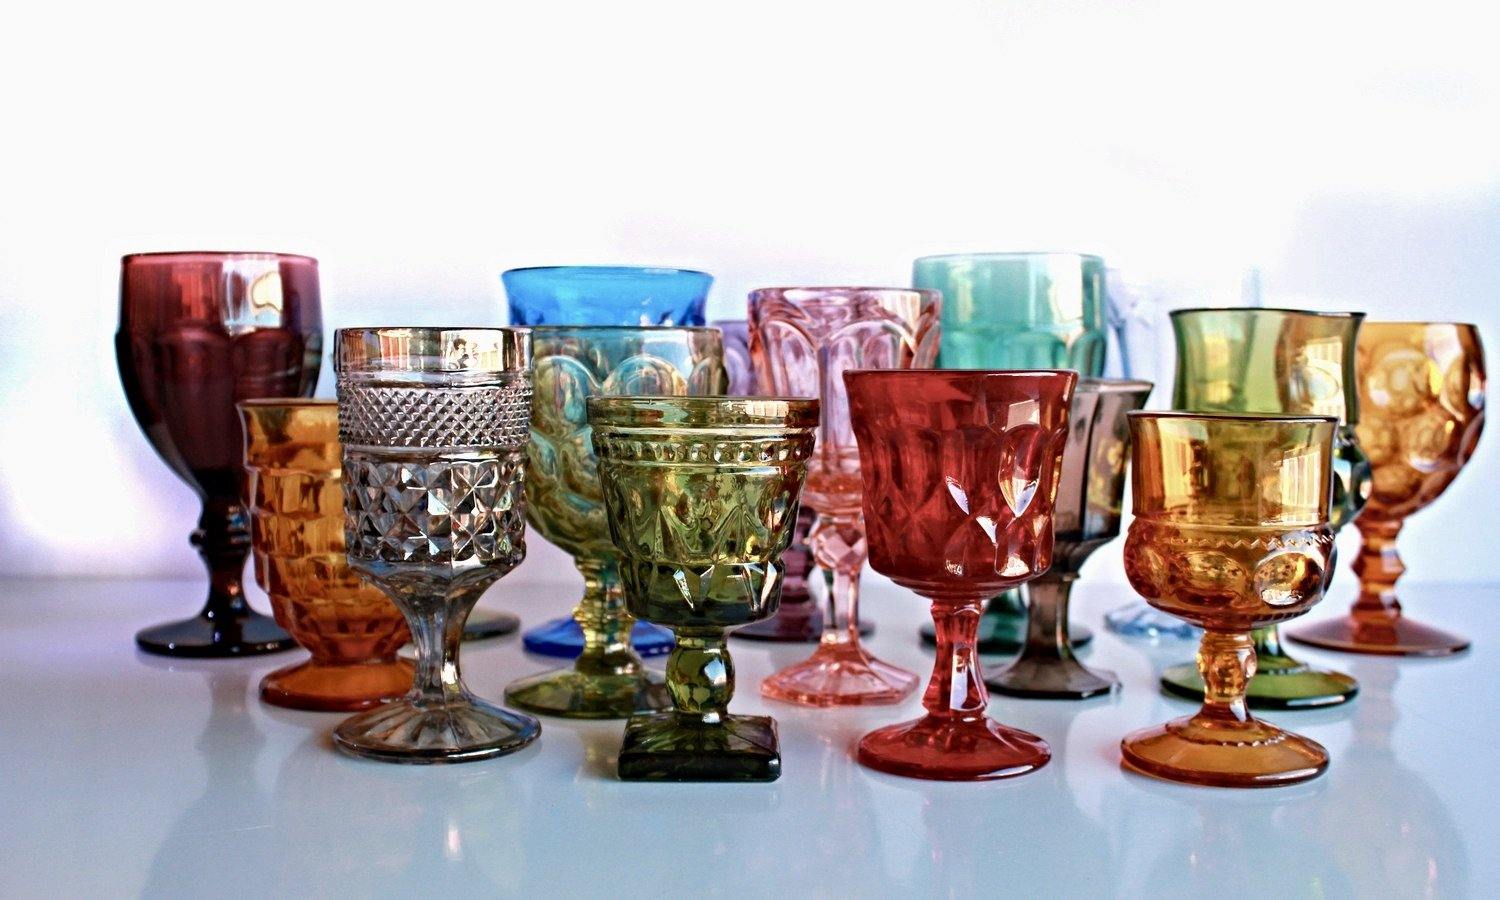 Mixed Glassware - The Mindful Market Company